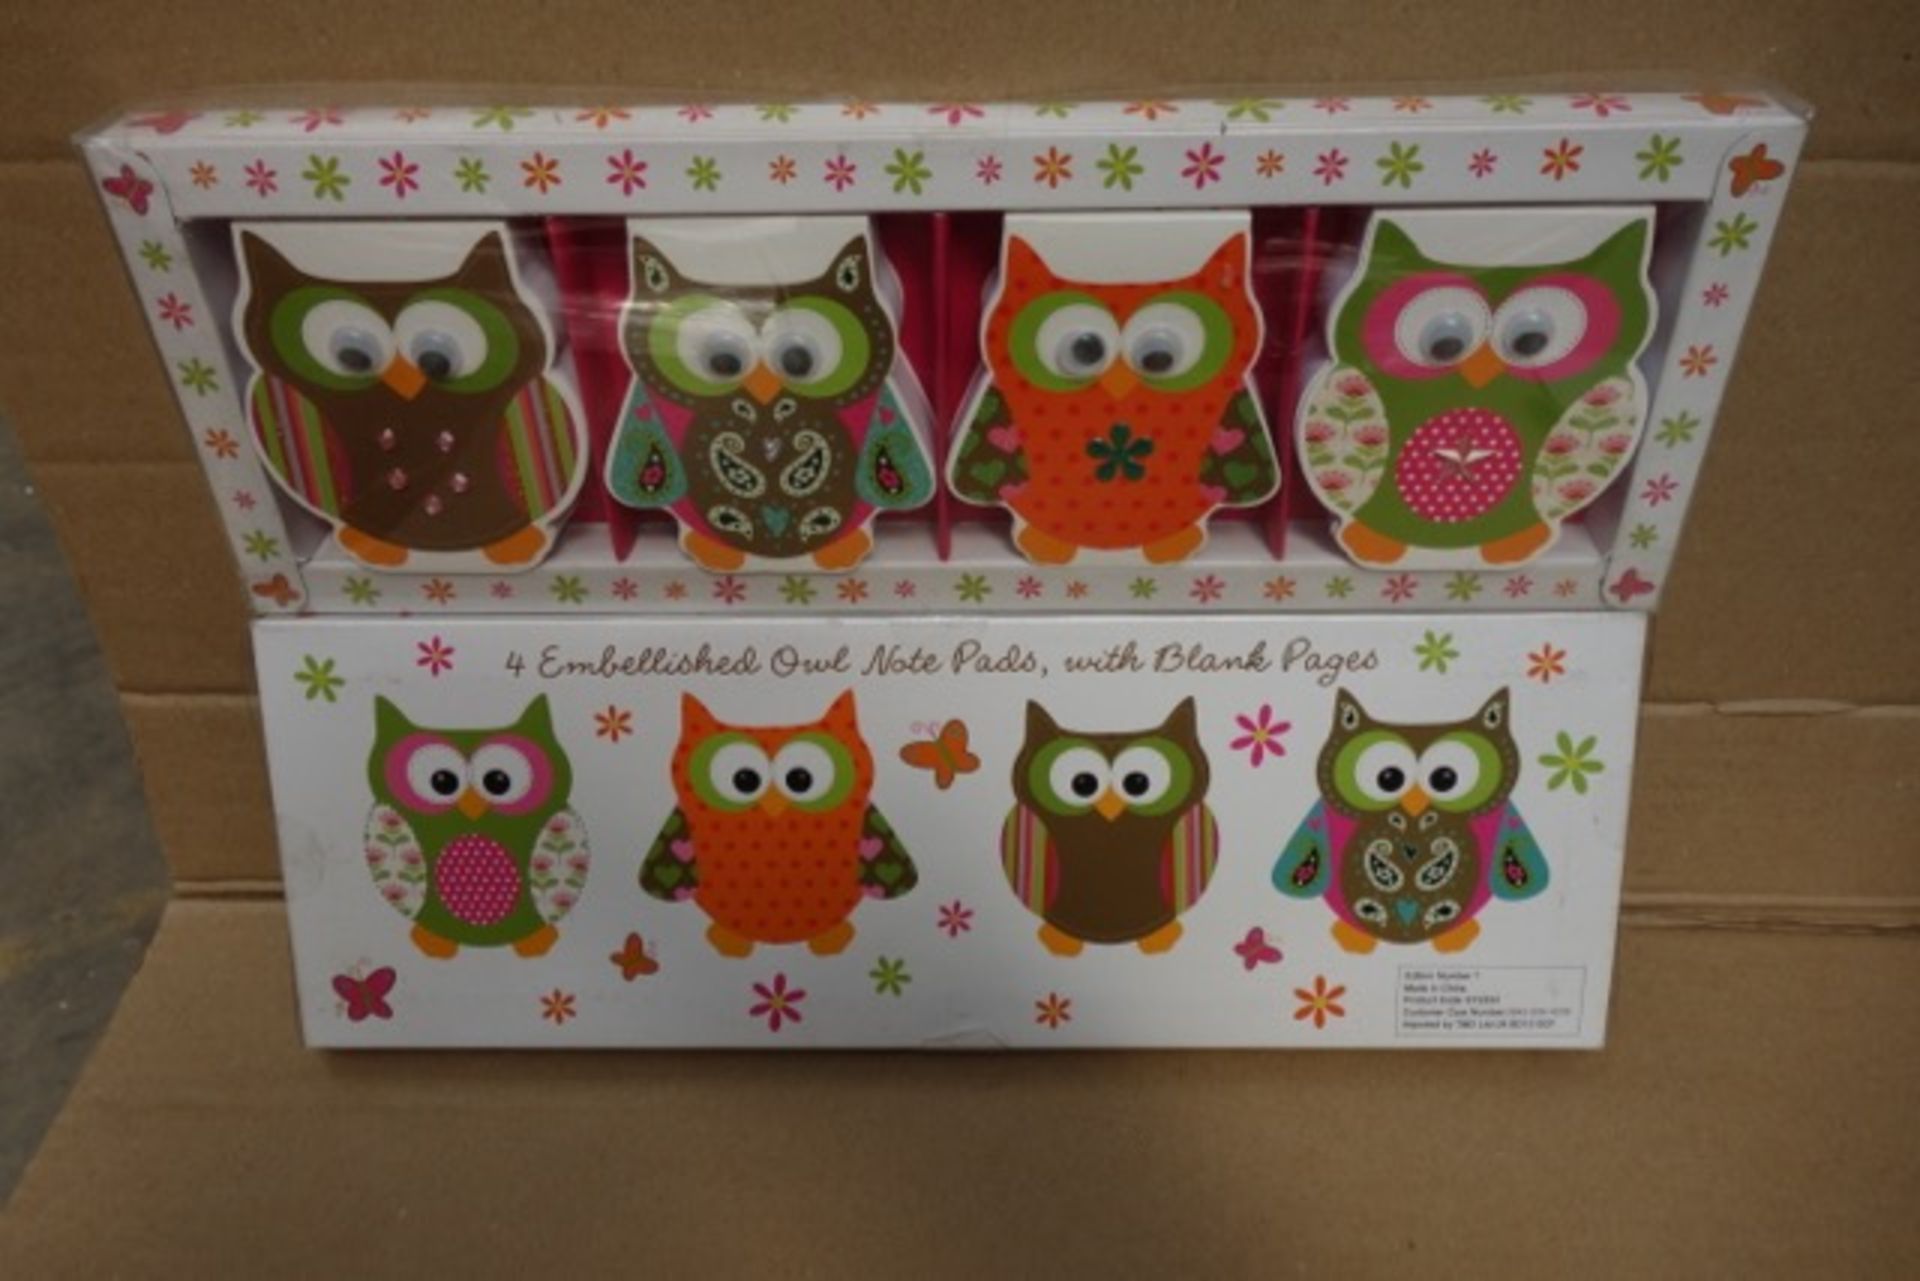 80 x Set's of 4 Embellished Owl Note Pads with Blank Pages. High quality, fun & trendy design.